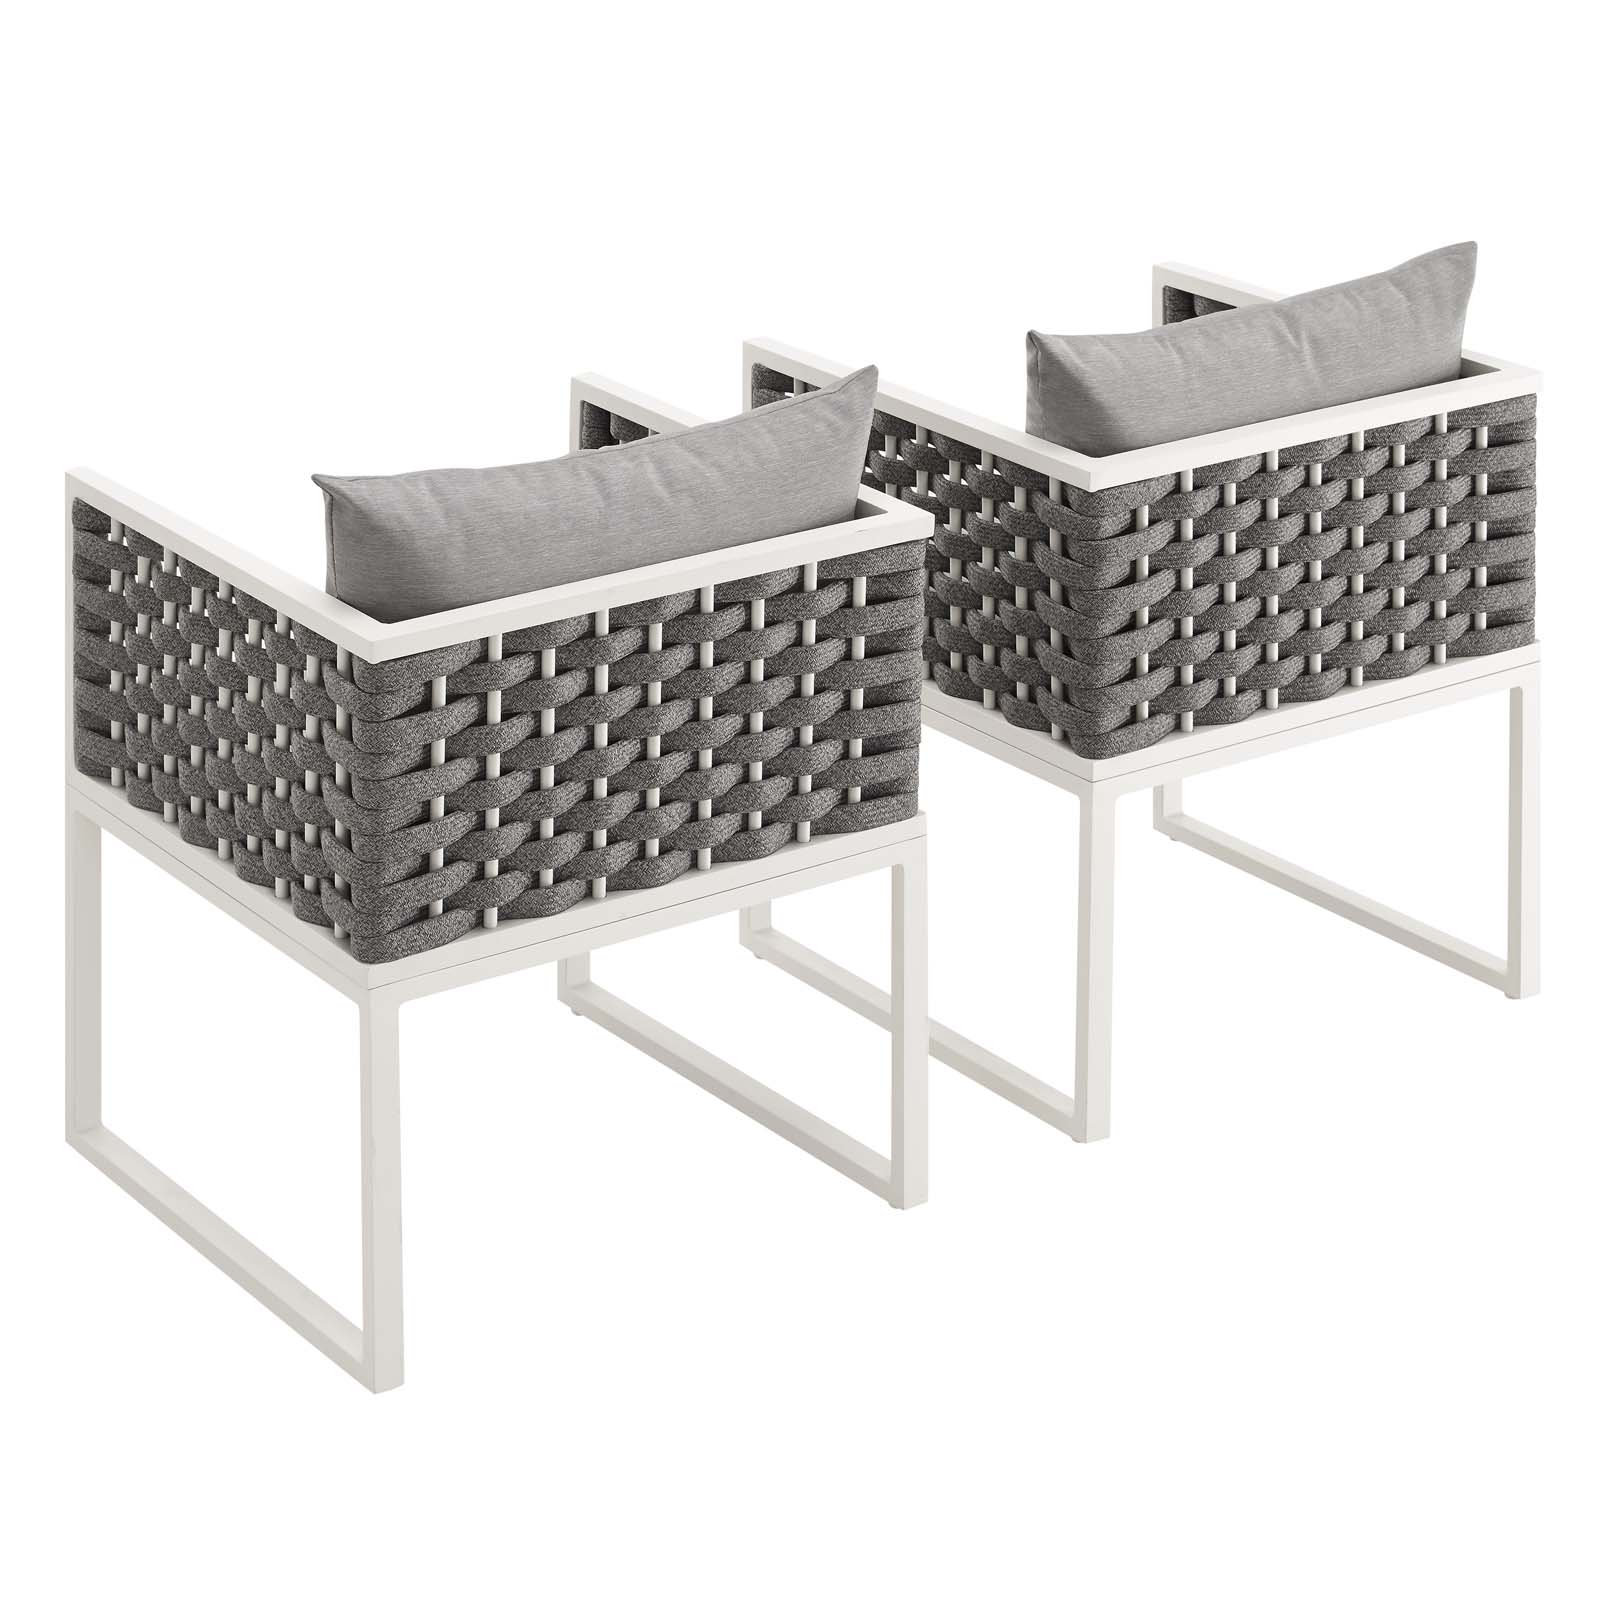 Modern Contemporary Urban Outdoor Patio Balcony Garden Furniture Side Dining Chair Armchair, Set of Two, Fabric Aluminium, White Grey Gray - image 3 of 6